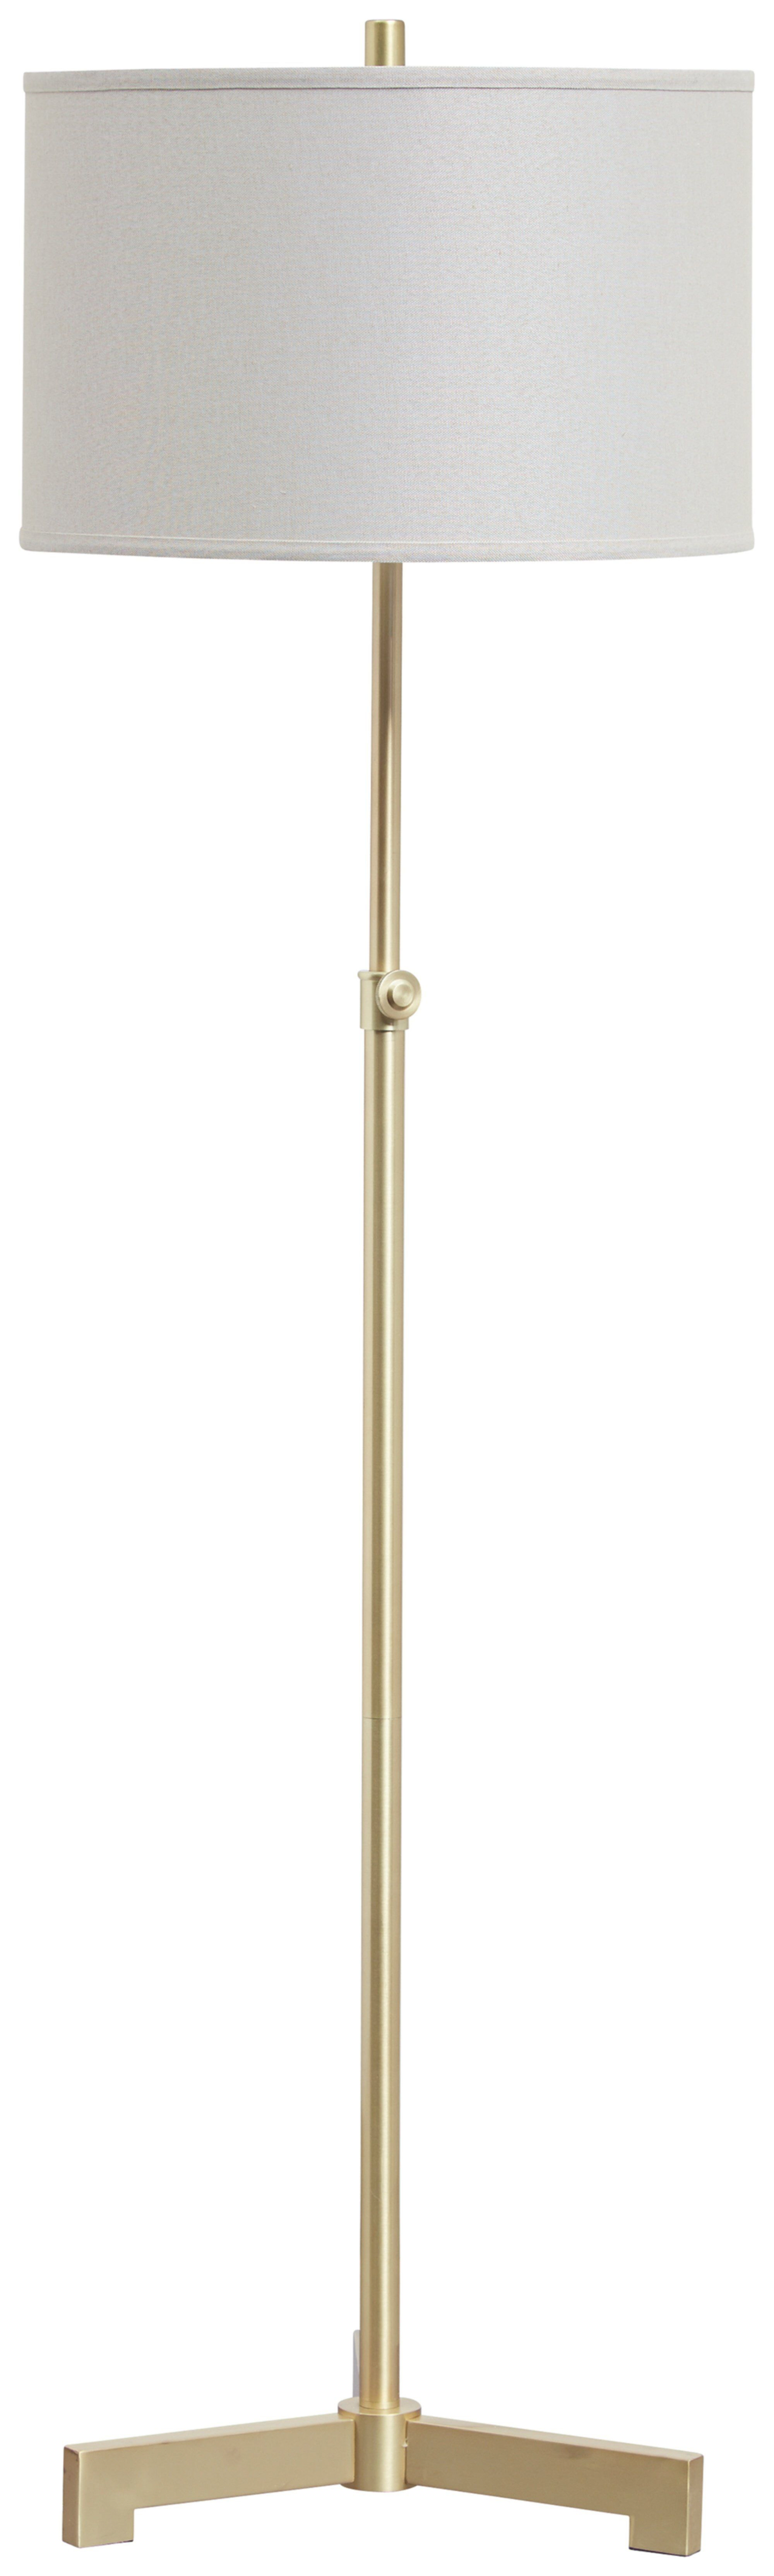 Gabrielle Laurinda 59 Traditional Floor Lamp In 2019 for size 2000 X 6654